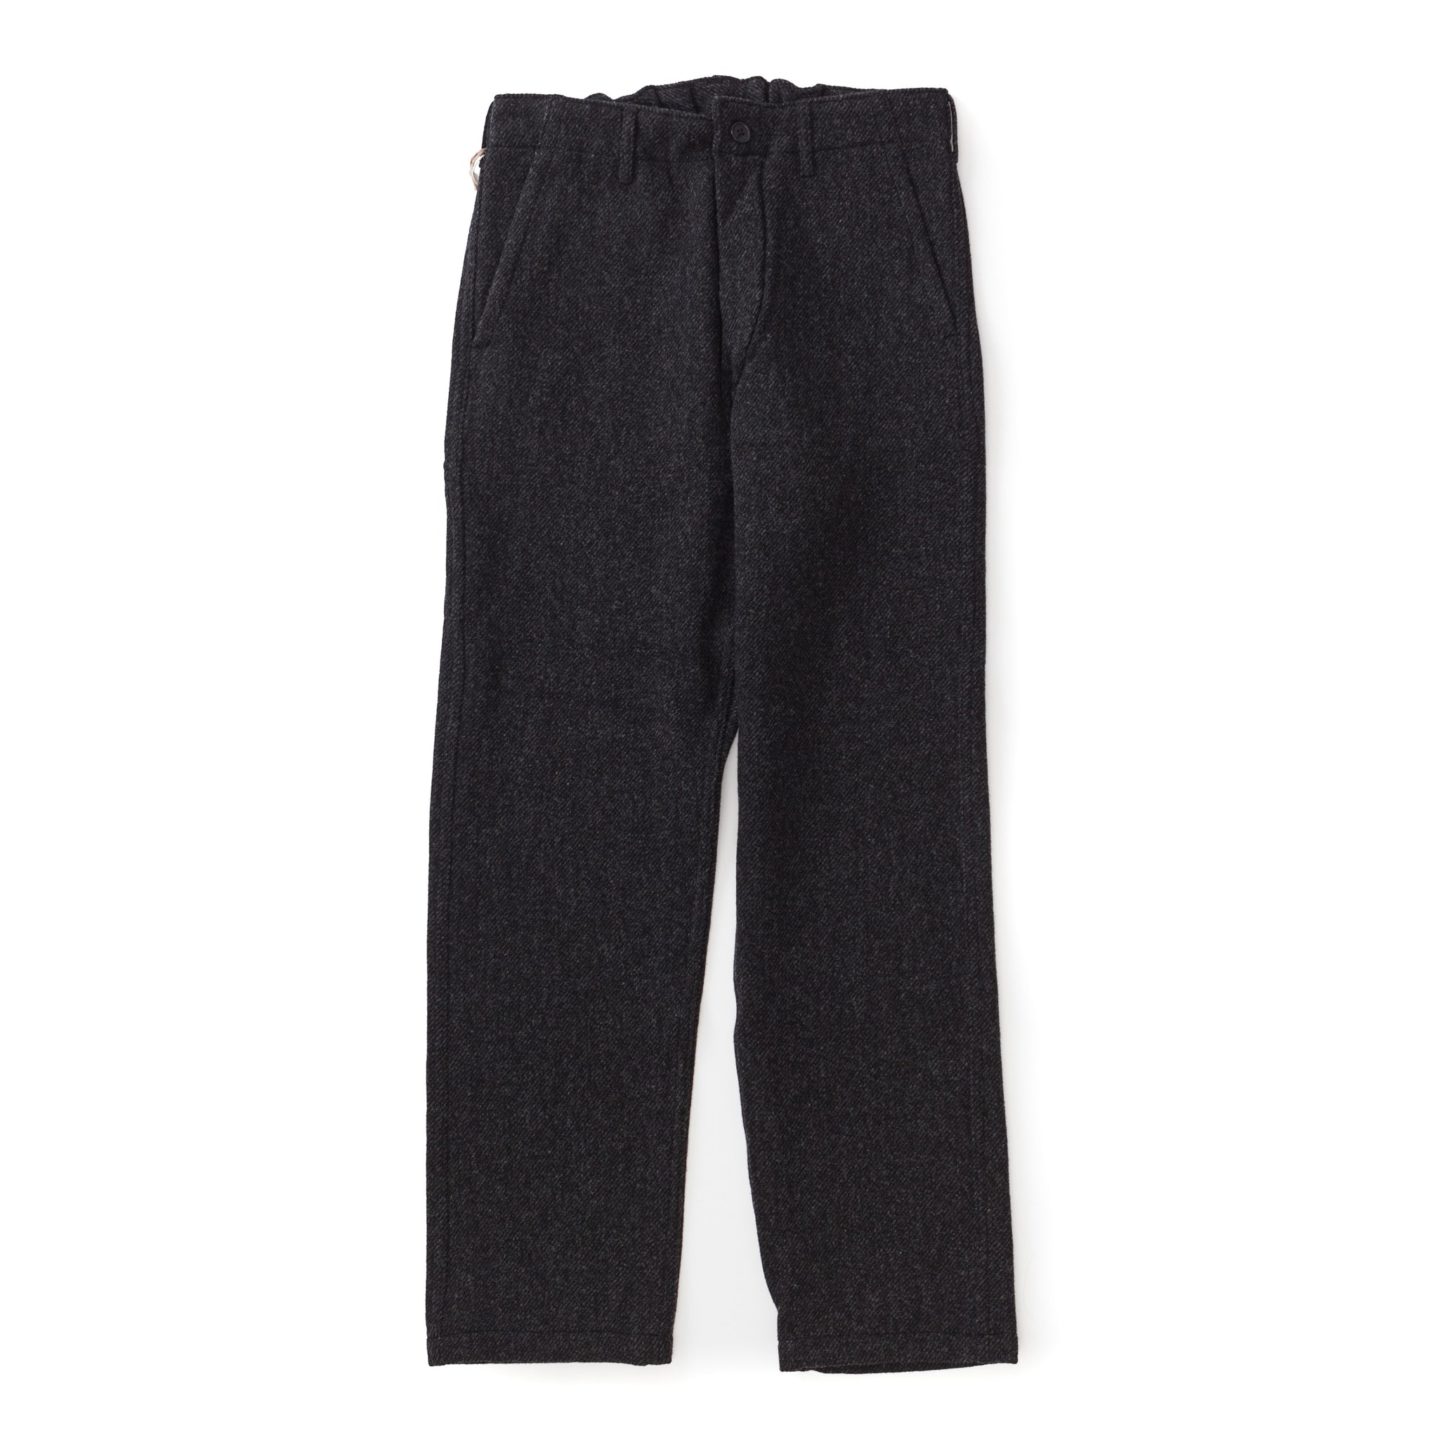 french work pants orslow